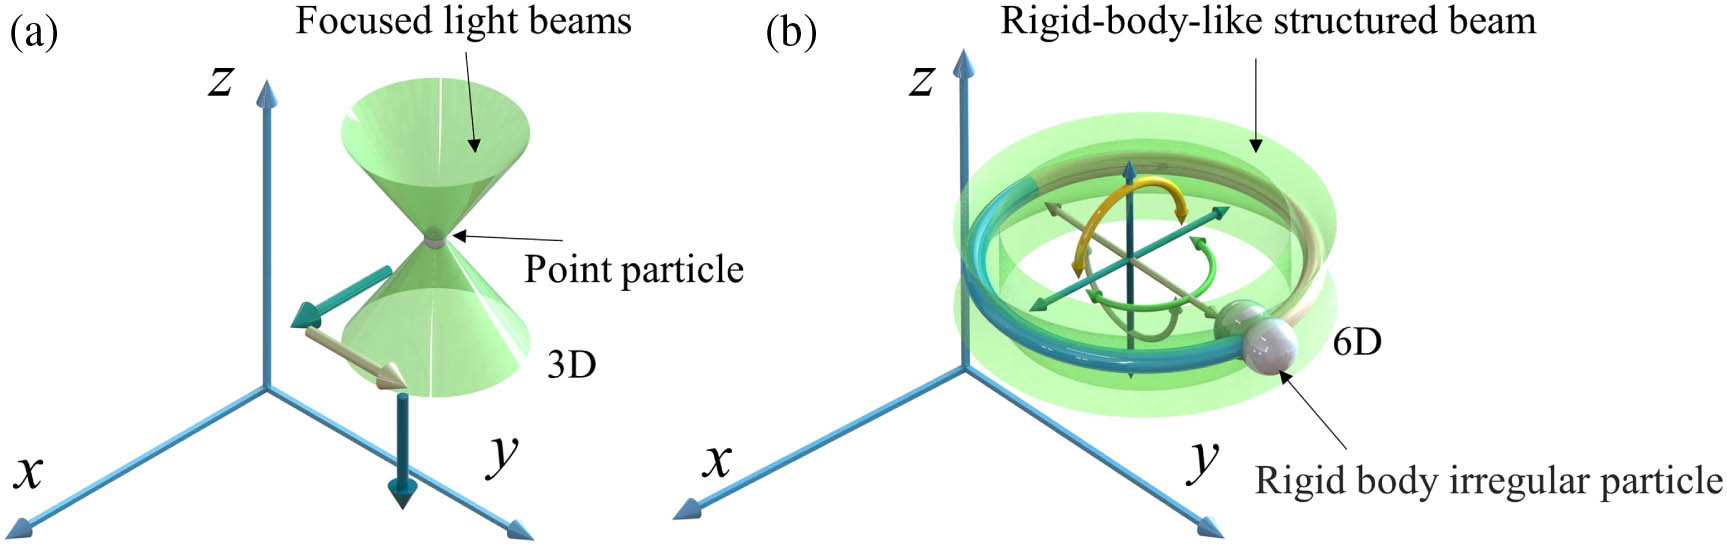 Concepts of (a) conventional optical tweezers for manipulating mass-point particles and (b) rigid-body emulated structured light tweezers for manipulating irregular objects with full-degree-of-freedom six-axis motion.